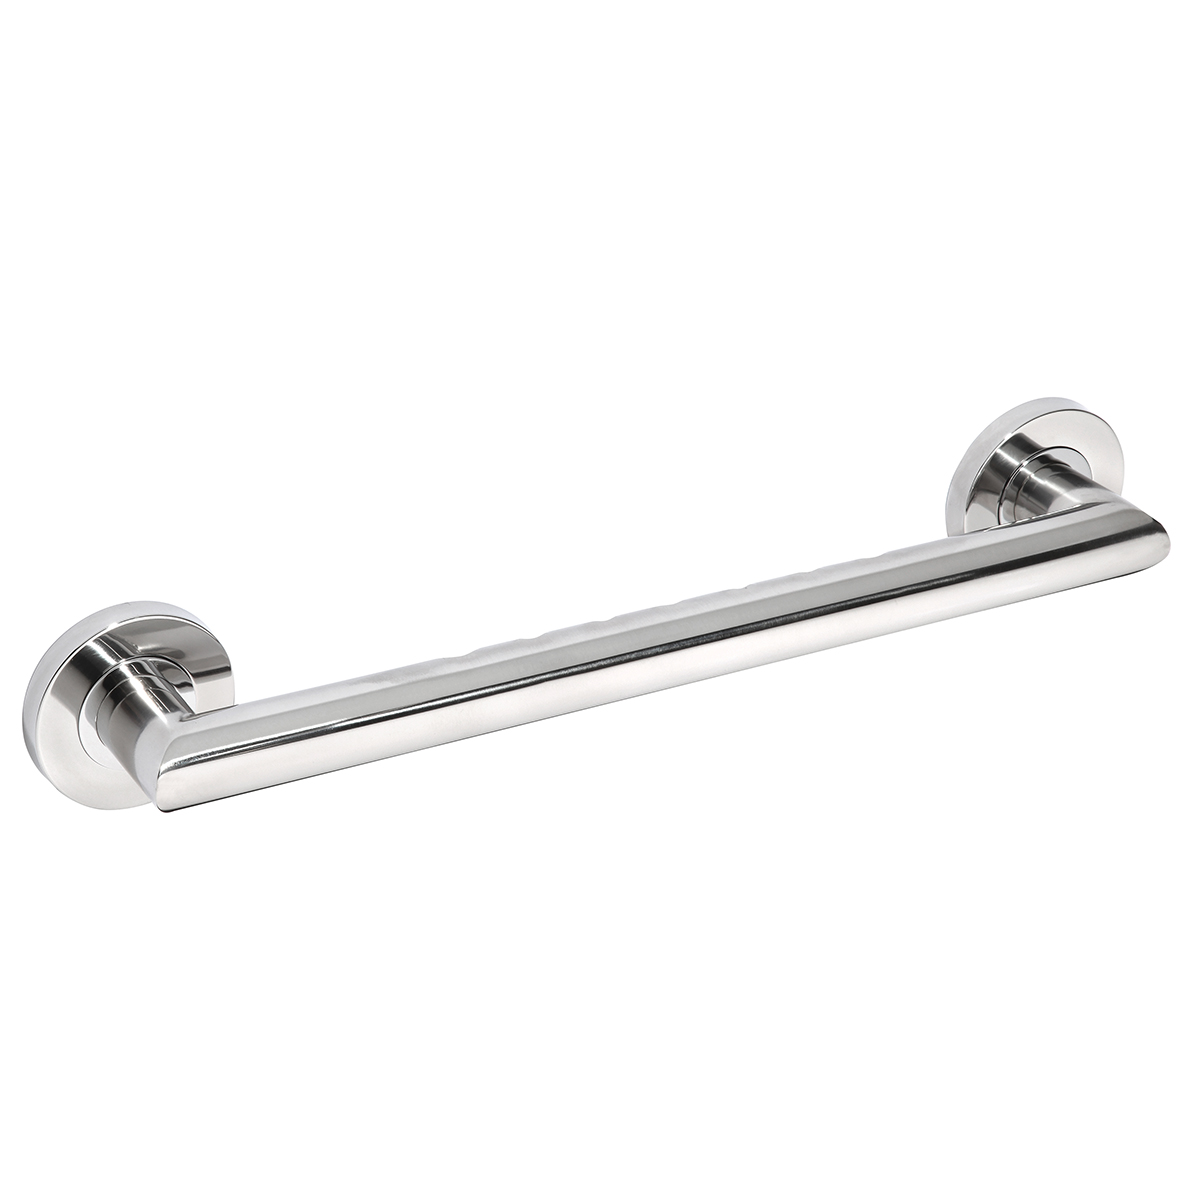 Astral - Grab Bar - 24" - Polished Stainless Steel